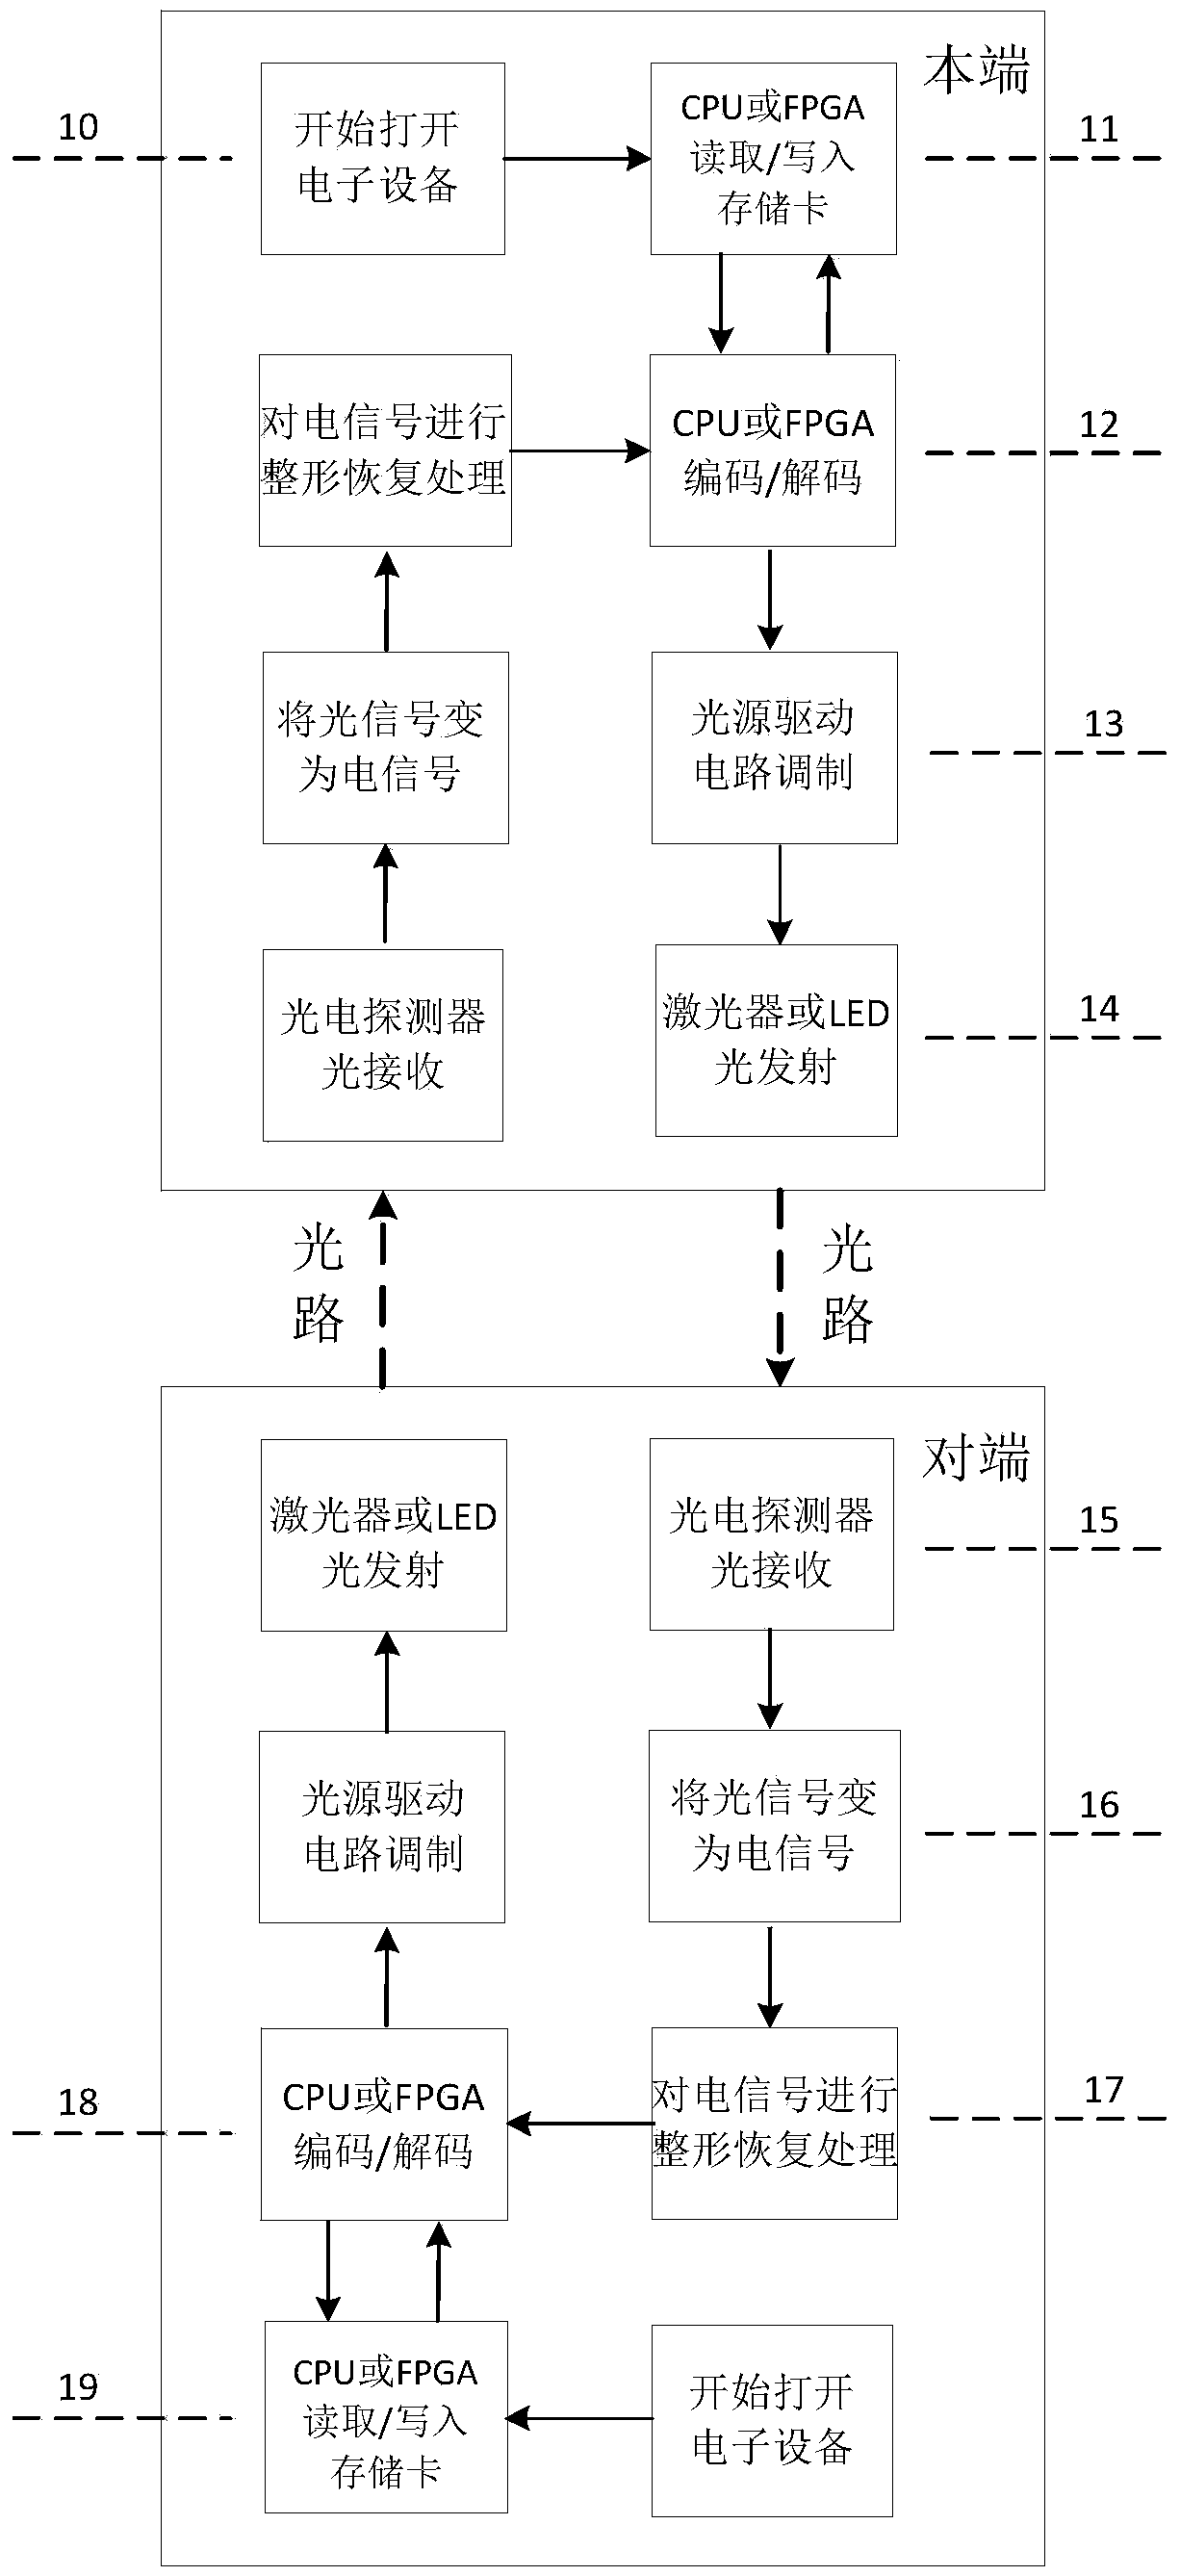 Near-field optical wireless high-speed simple interactive communication system and method used between electronic devices